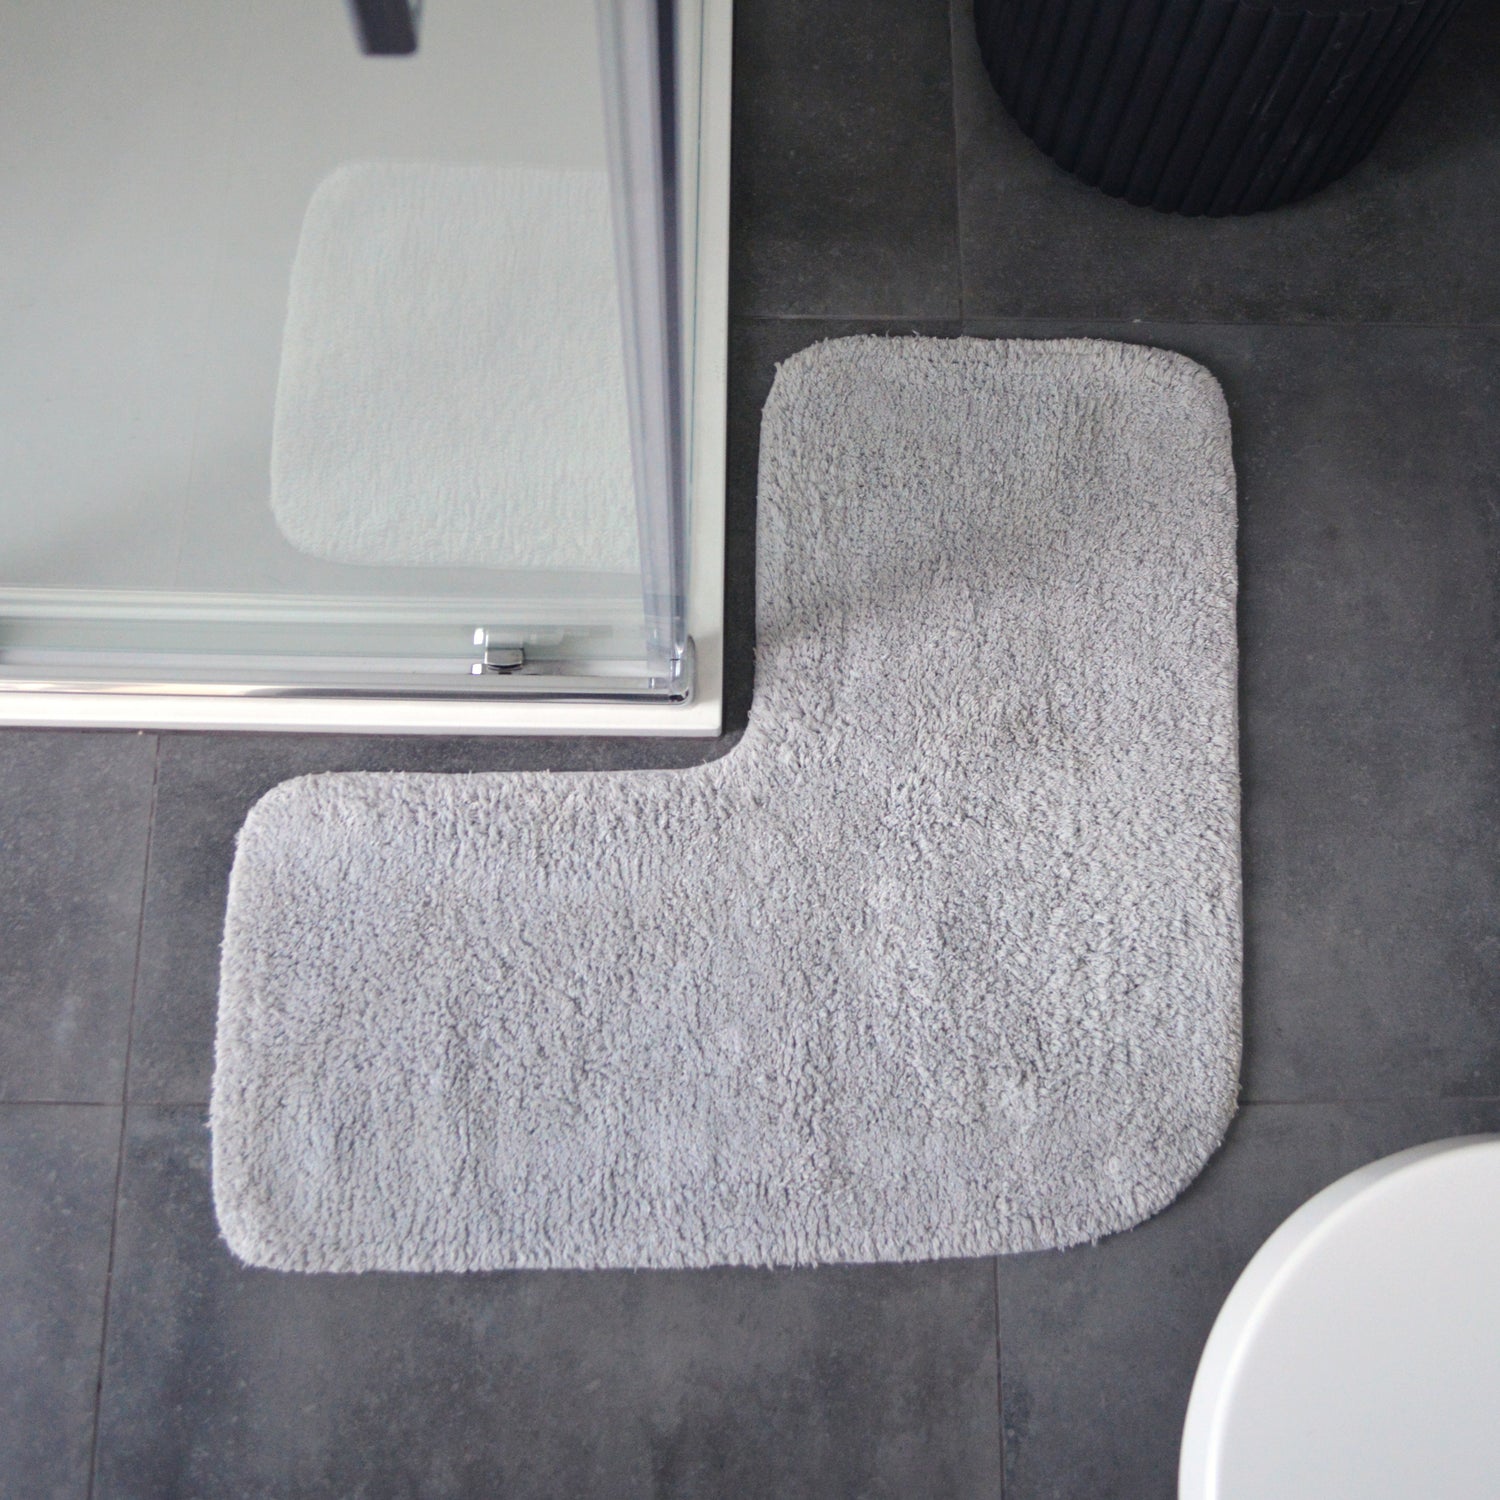 Finding the best corner and curved shower mat